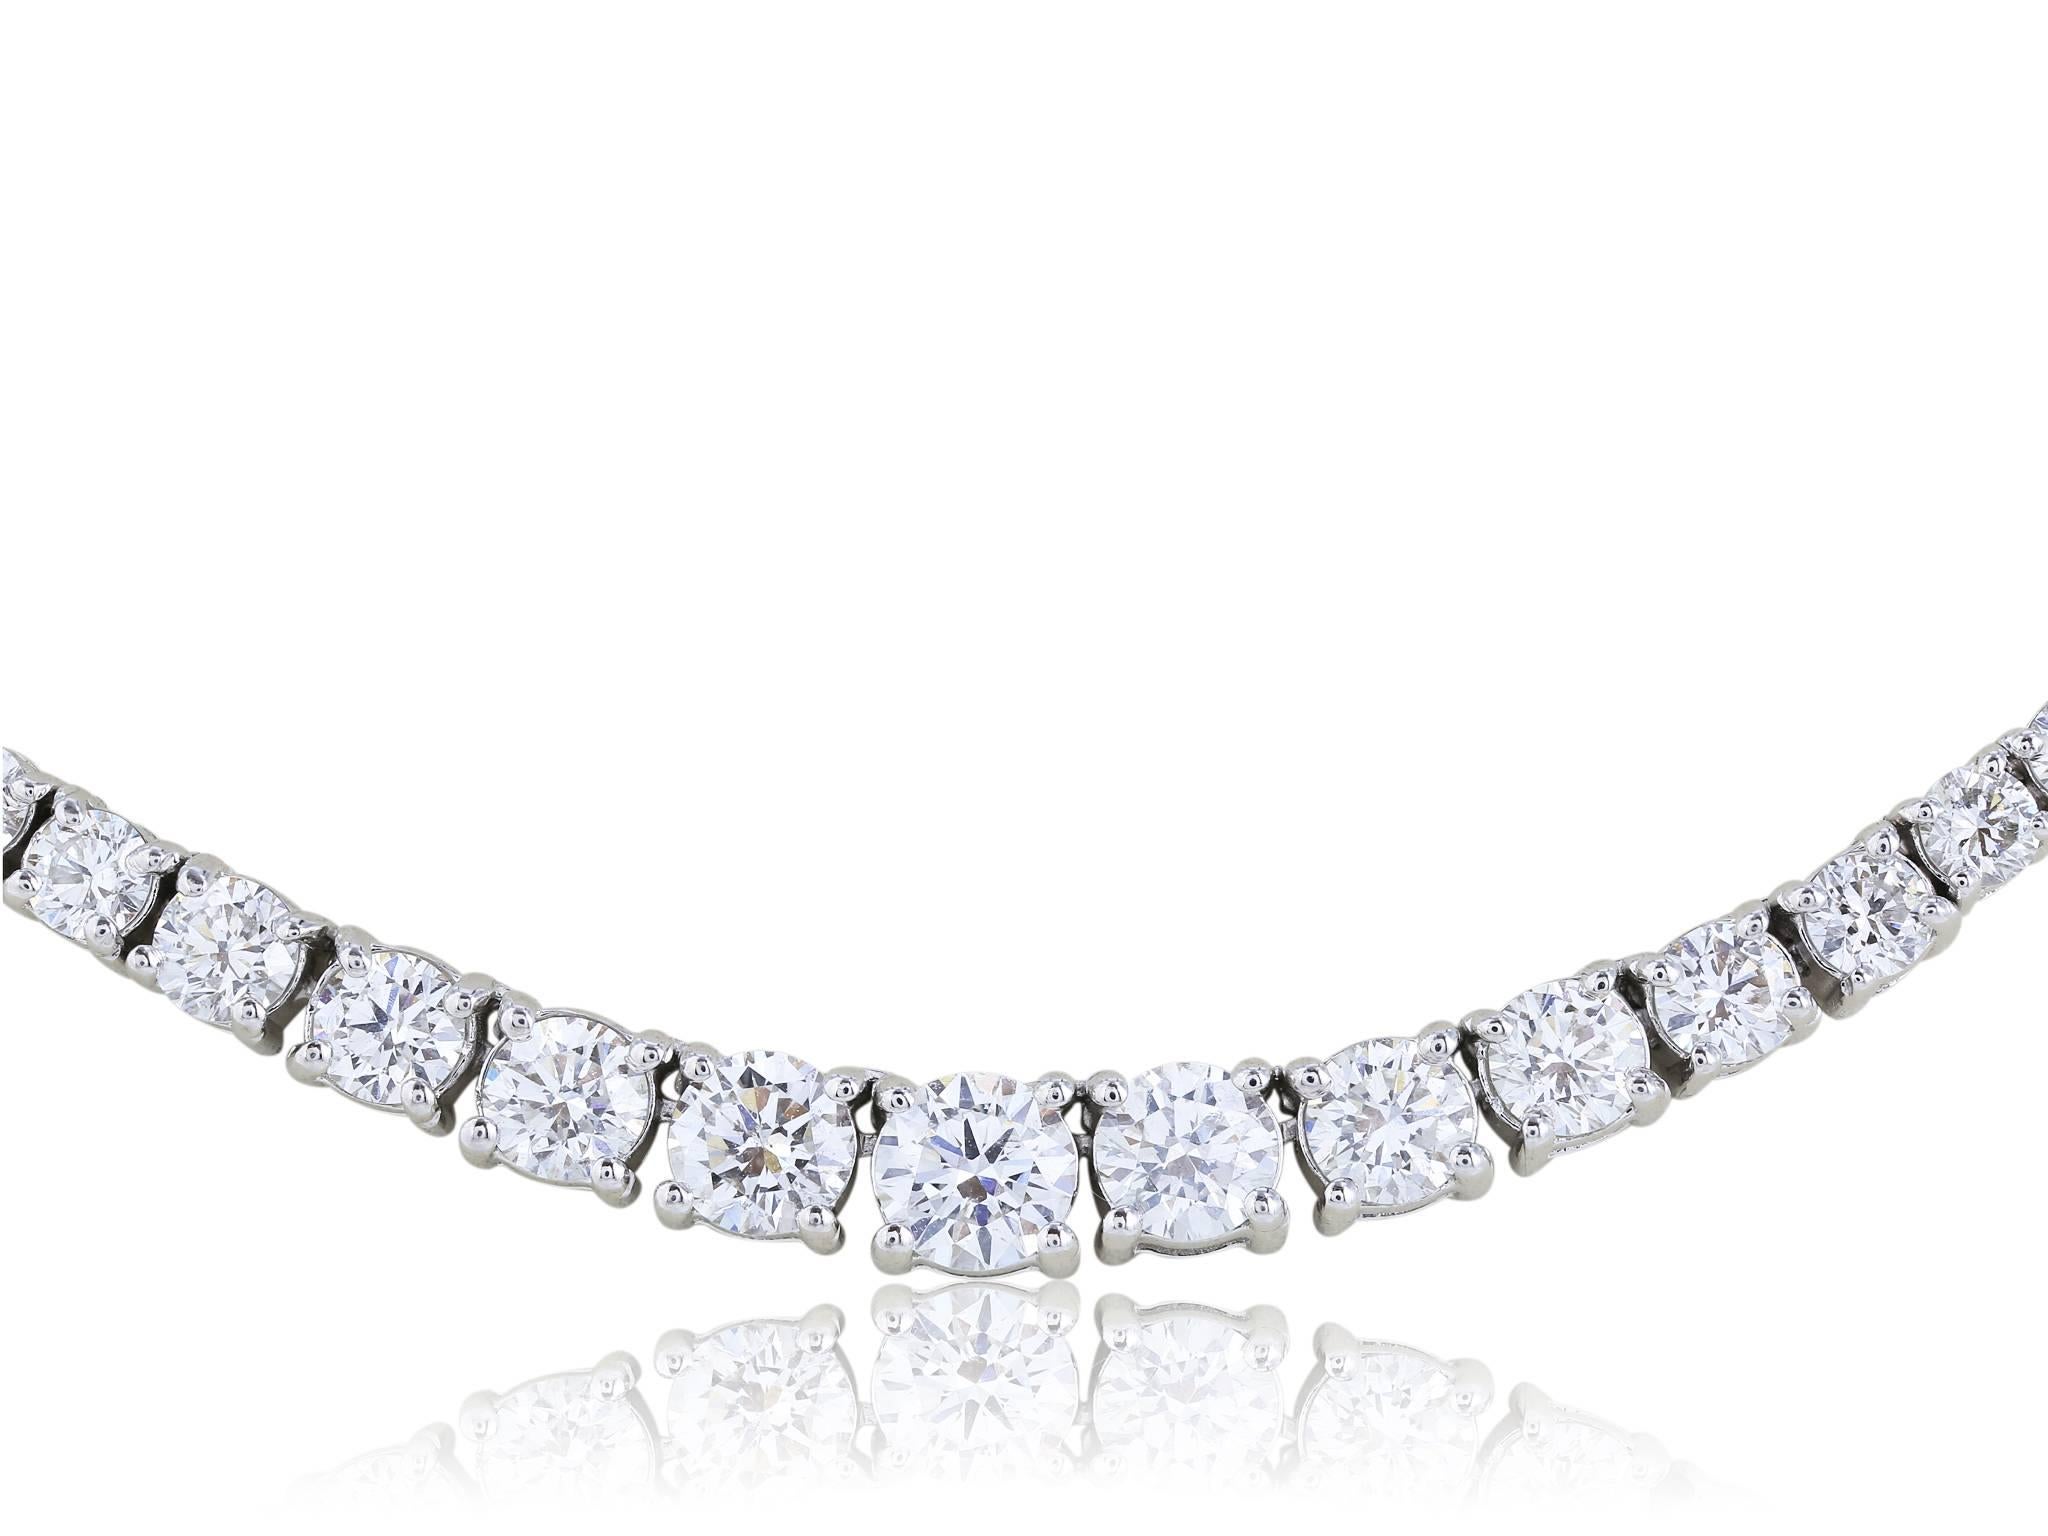 20.87 Carat Diamond Gold Riviere Necklace In Excellent Condition For Sale In Chestnut Hill, MA